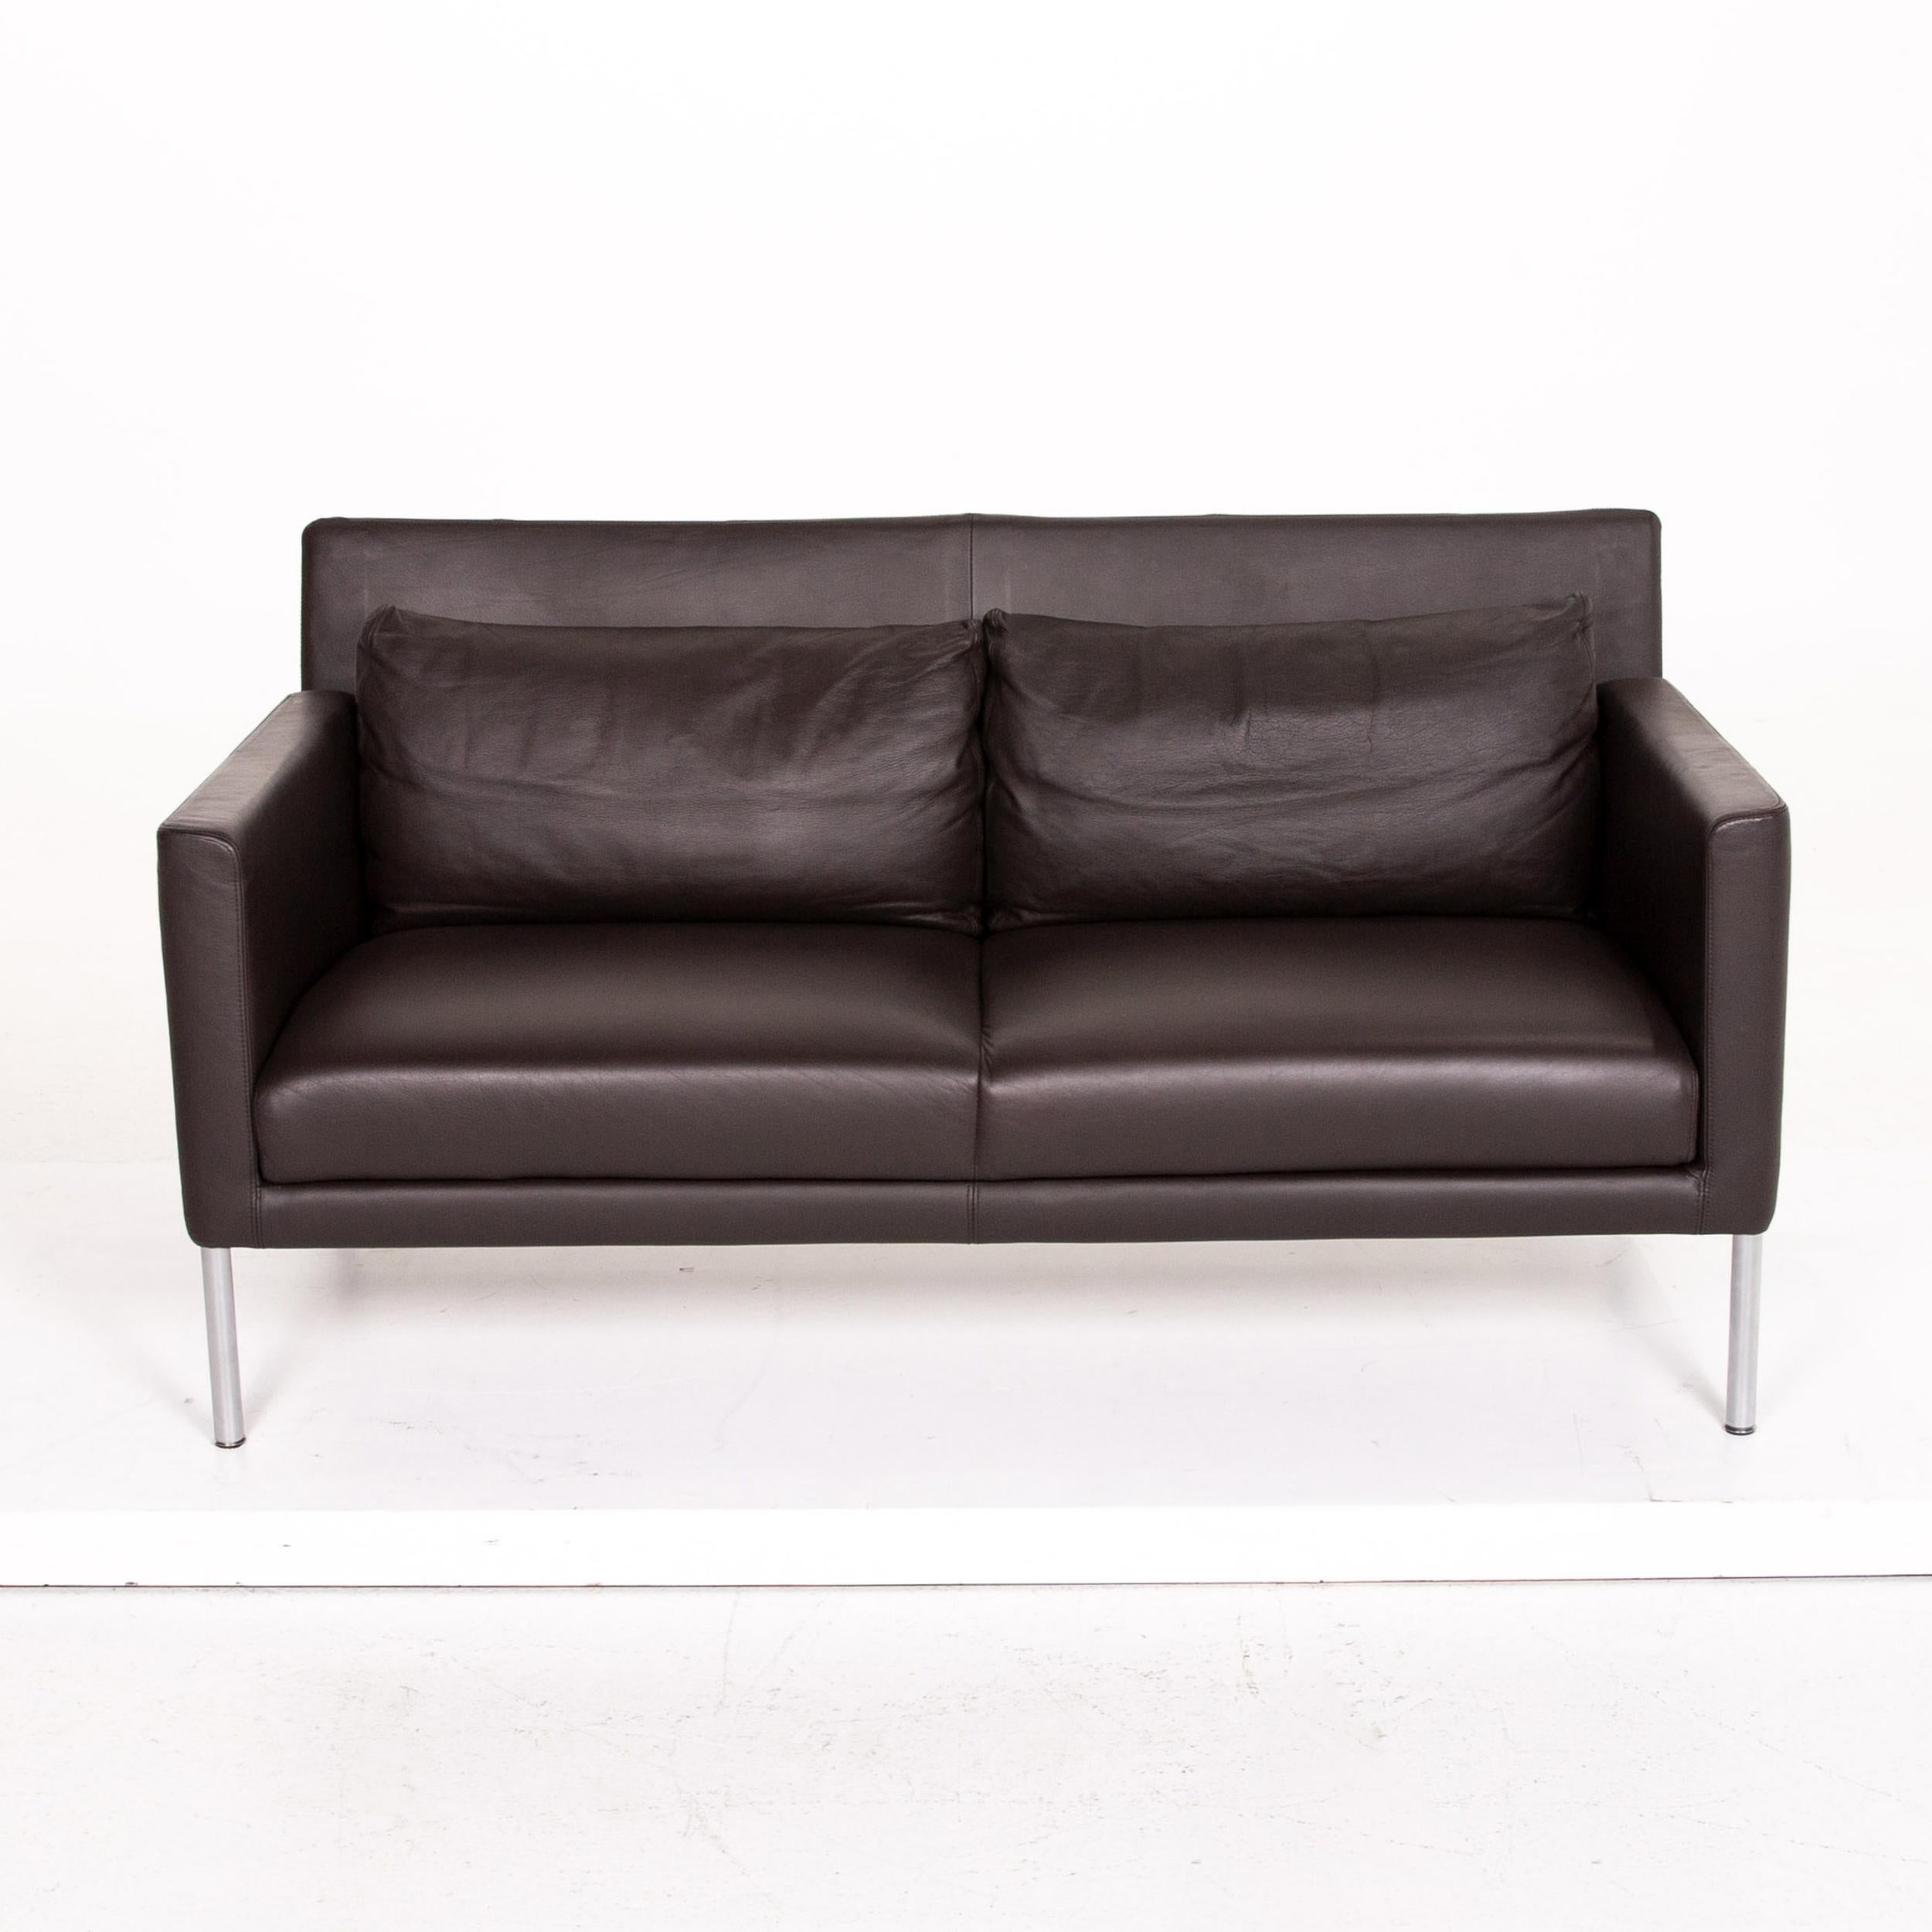 Contemporary Walter Knoll Leather Sofa Brown Dark Brown Two-Seat Couch For Sale